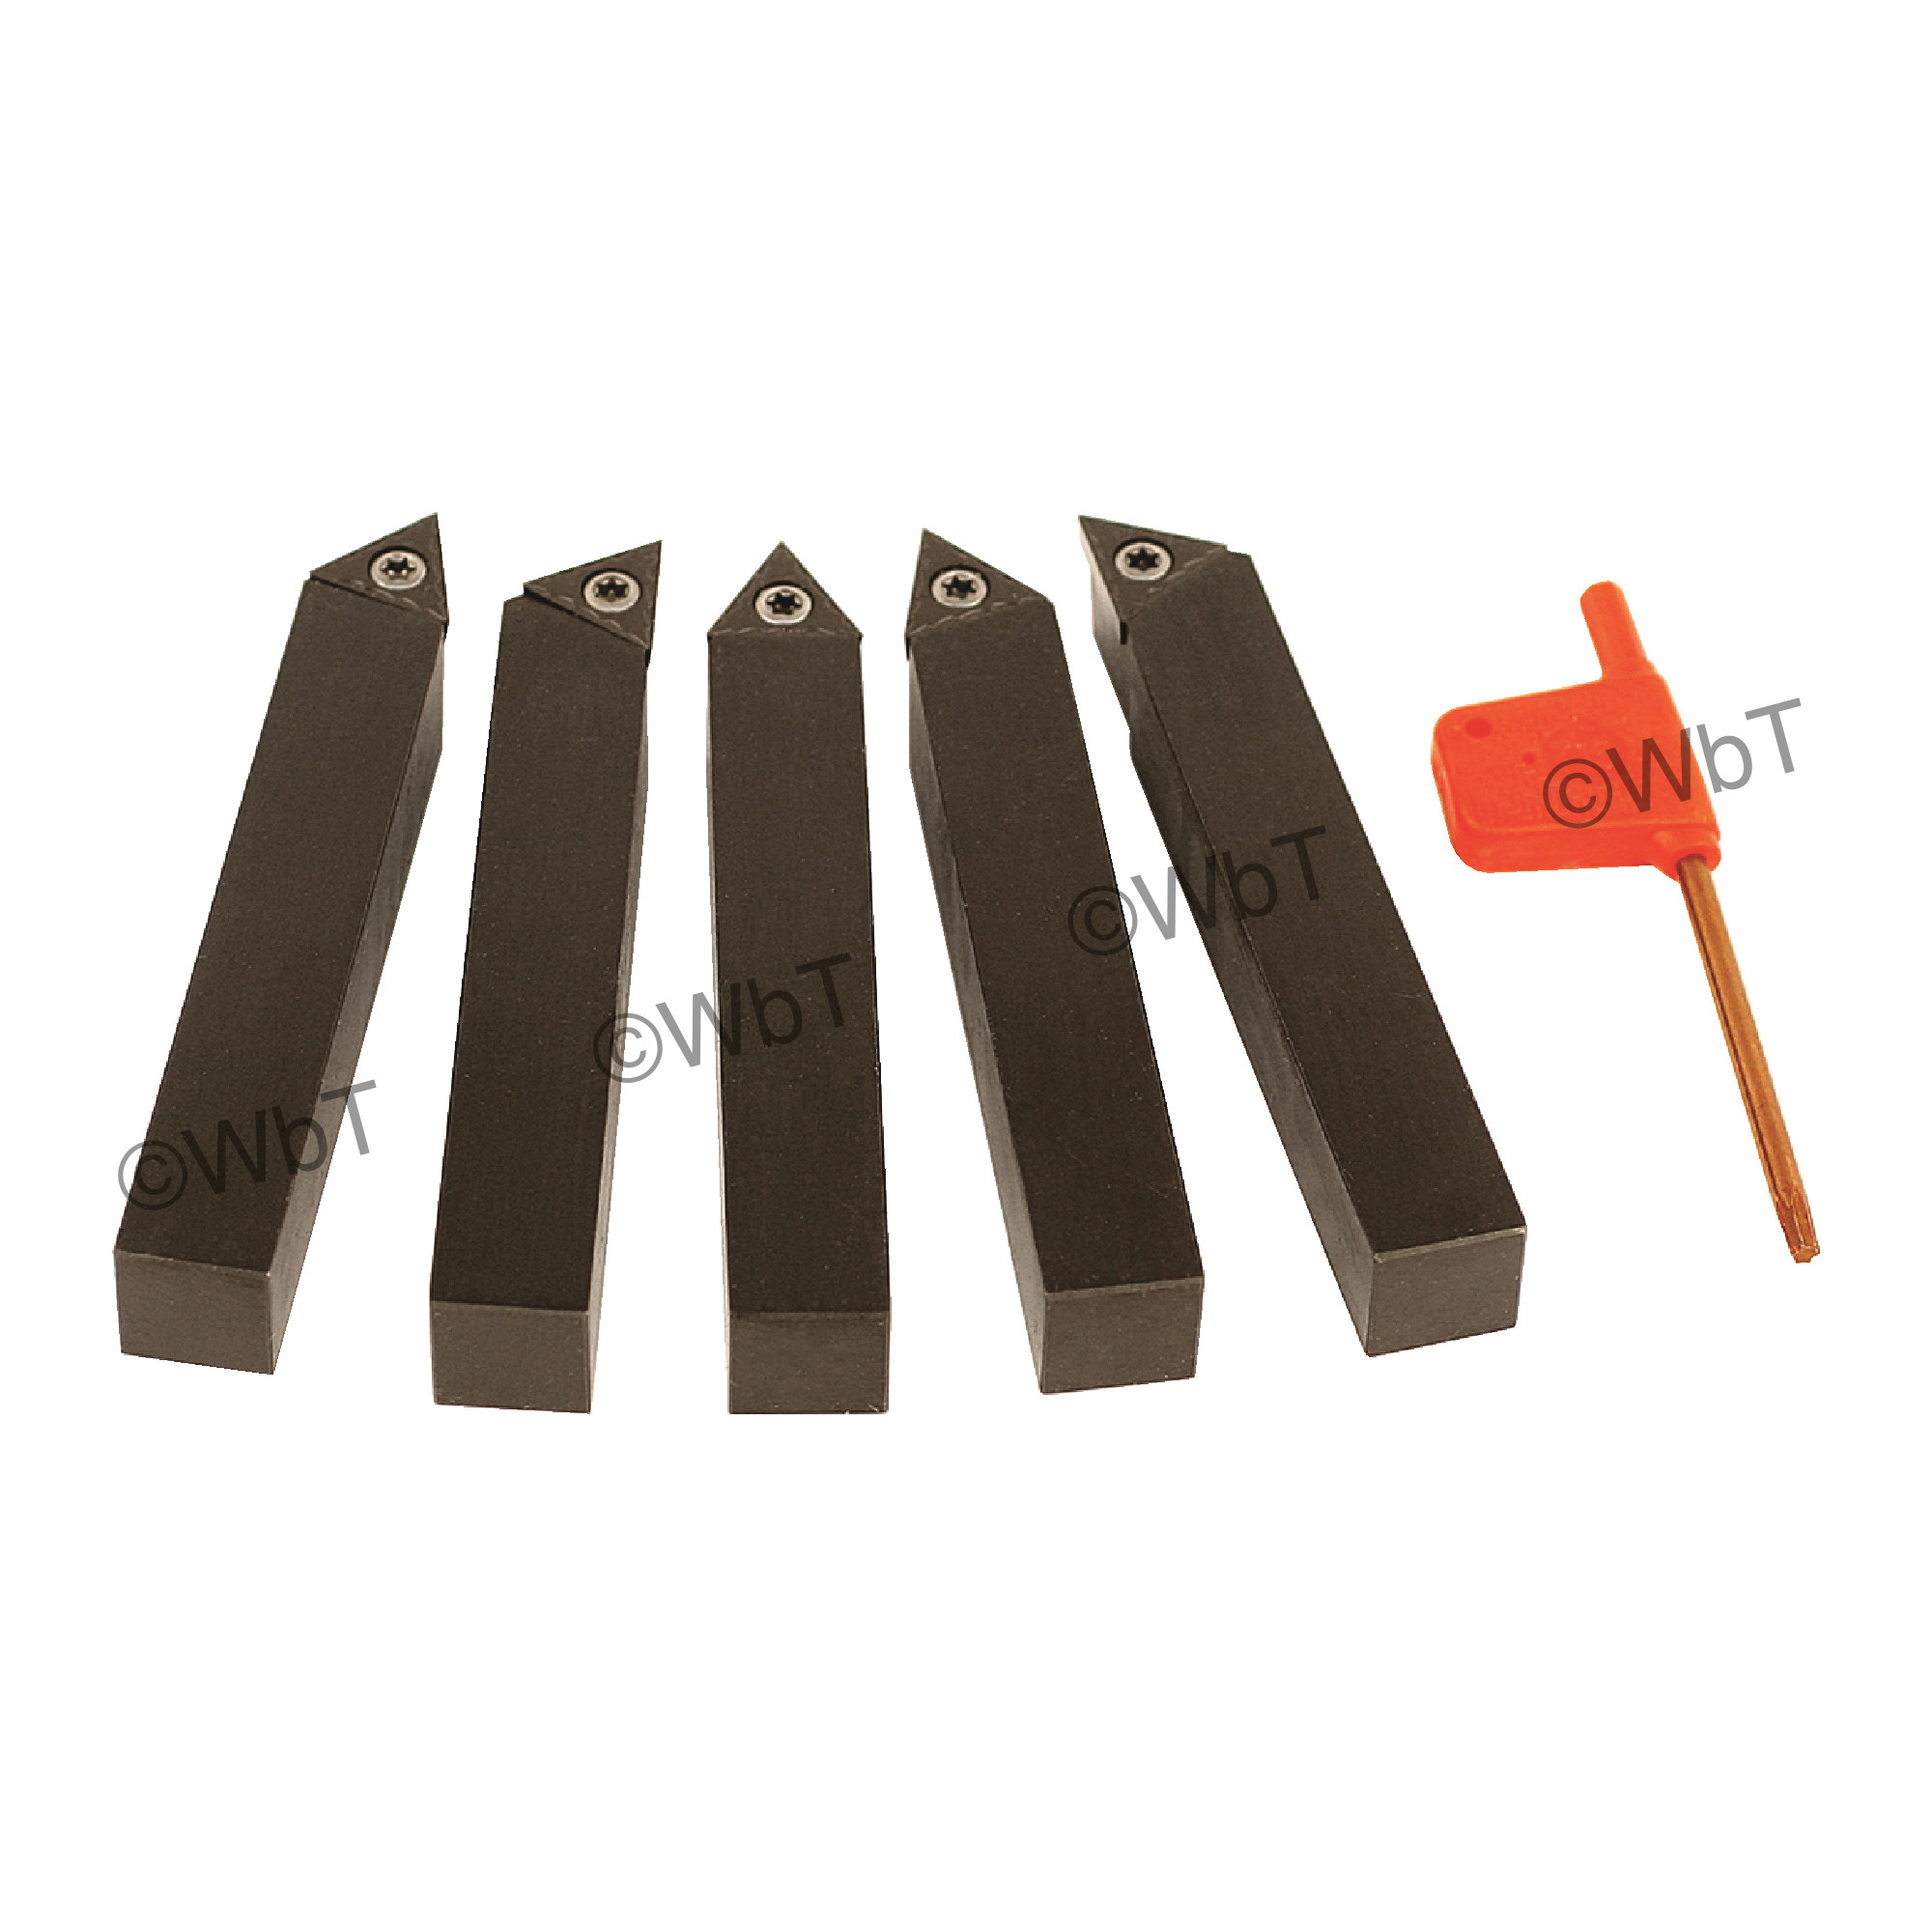 TERRA CARBIDE - 5 Piece External Turning Set with Inserts / Accepts TCMT3(2.5)_ Inserts / 3/4" Shank